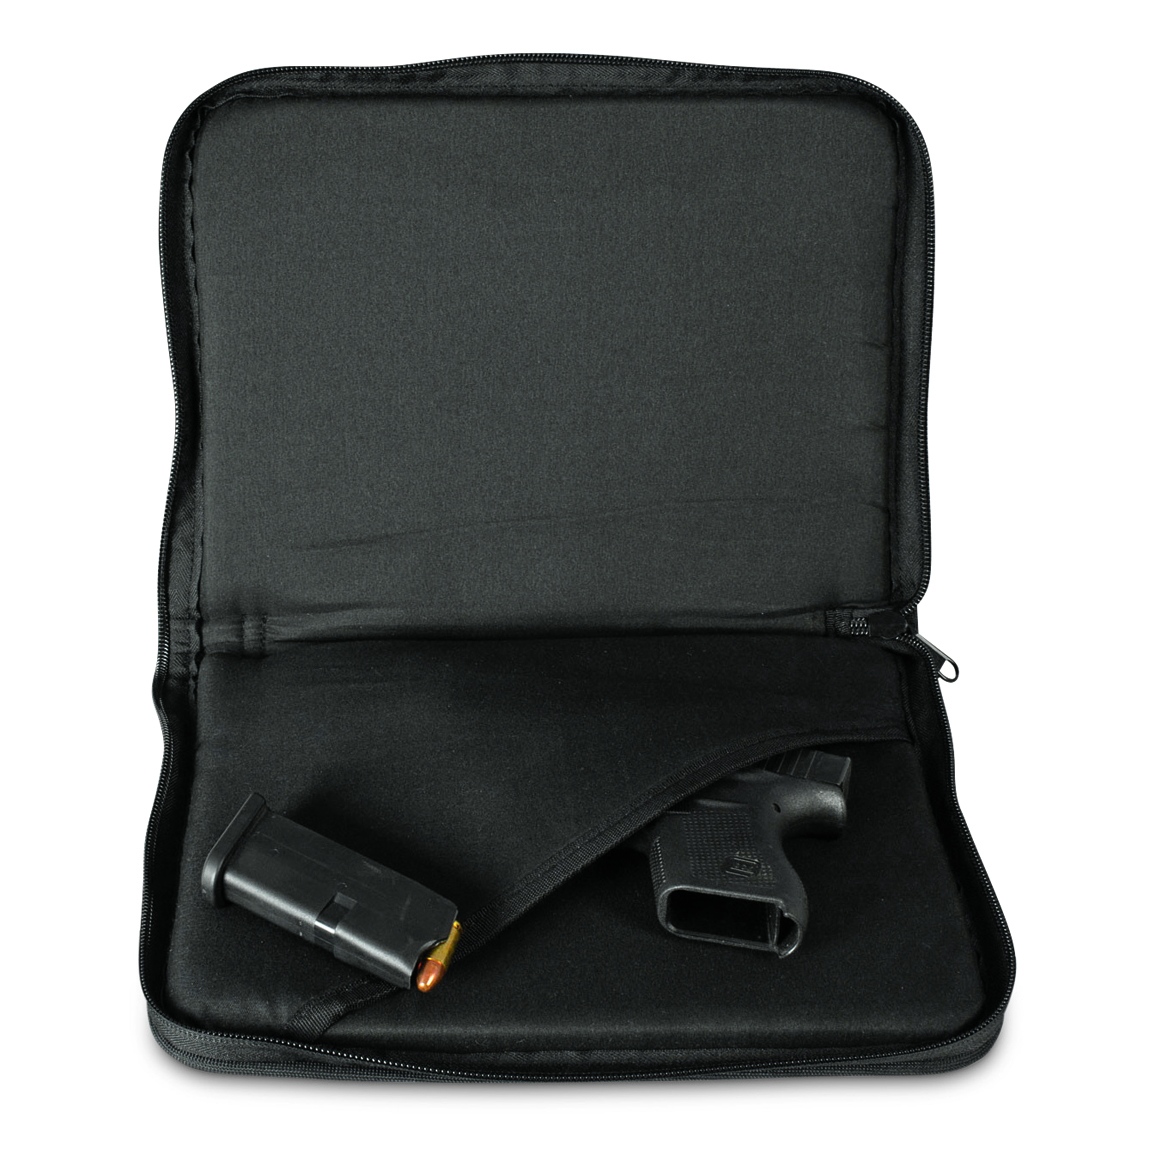 Foam-padded lockable main compartment with pistol sleeve